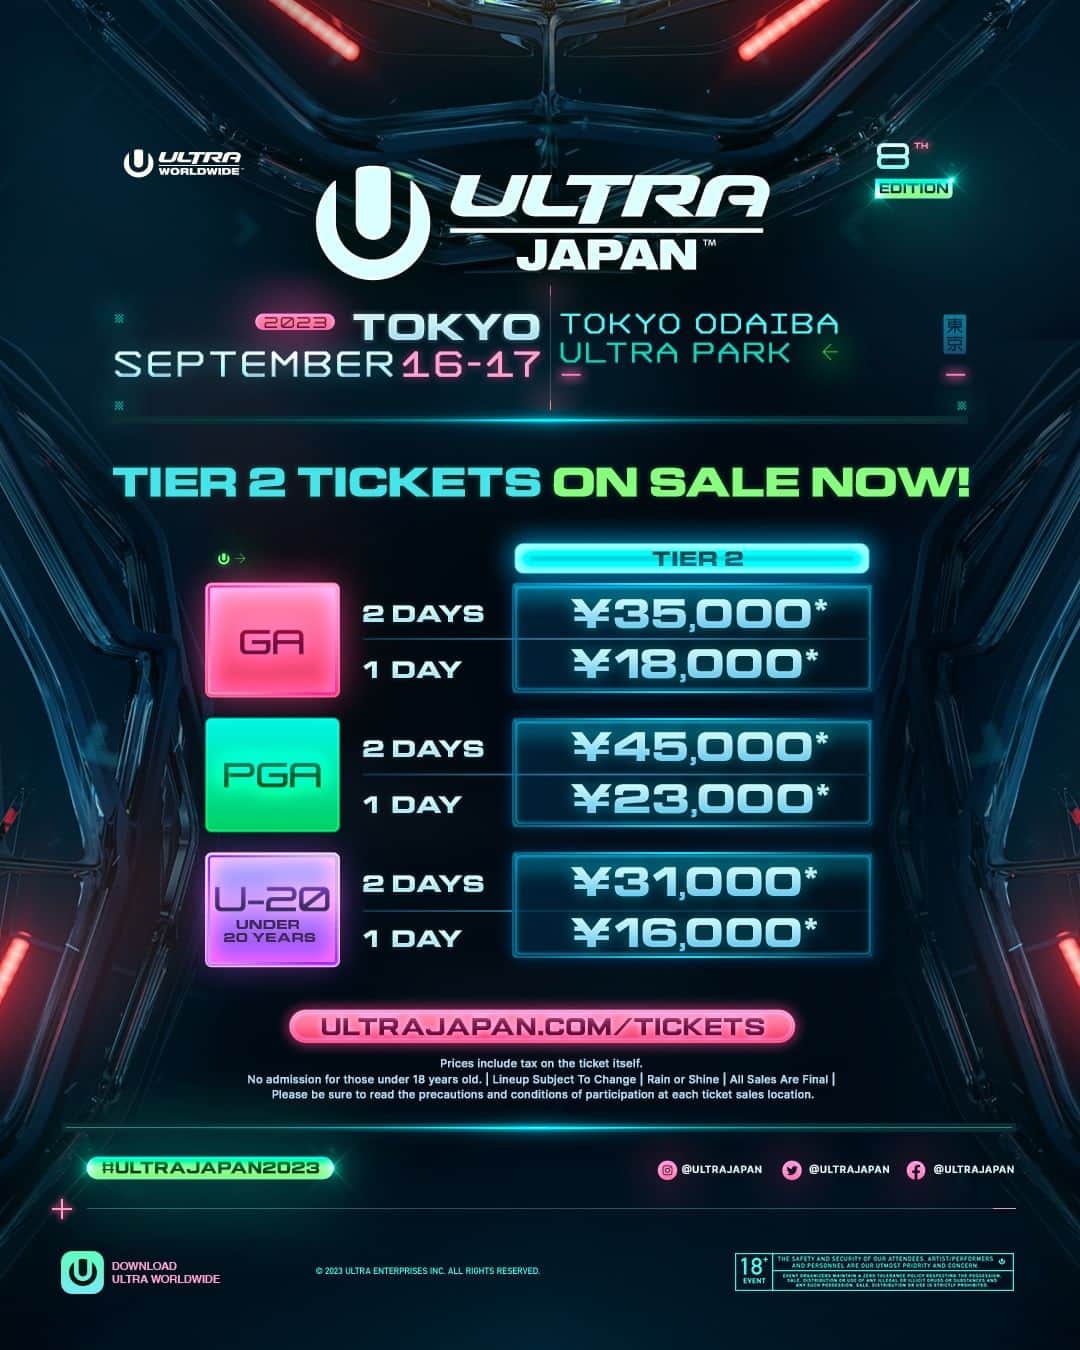 Ultra Japanのインスタグラム：「ULTRA JAPAN 2023  一般チケット アドバンス先着先行発売開始🎟️ チケットのお買い求めはプロフィールリンクから‼️💨 👉 @ultrajapan  1DAY TICKETS も販売開始‼️  ※各チケット販売先の注意事項、及び参加条件を必ずご確認ください📝🔍  #ultrajapan #ultrajapan2023 #ウルトラジャパン  ULTRA JAPAN 2023 🔥 General tickets now on sale! 🎟️  Get your tickets through the profile link below!‼️💨 👉 @ultrajapan  ※Please make sure to check the terms and conditions, as well as the participation requirements from each ticket vendor. 📝🔍」